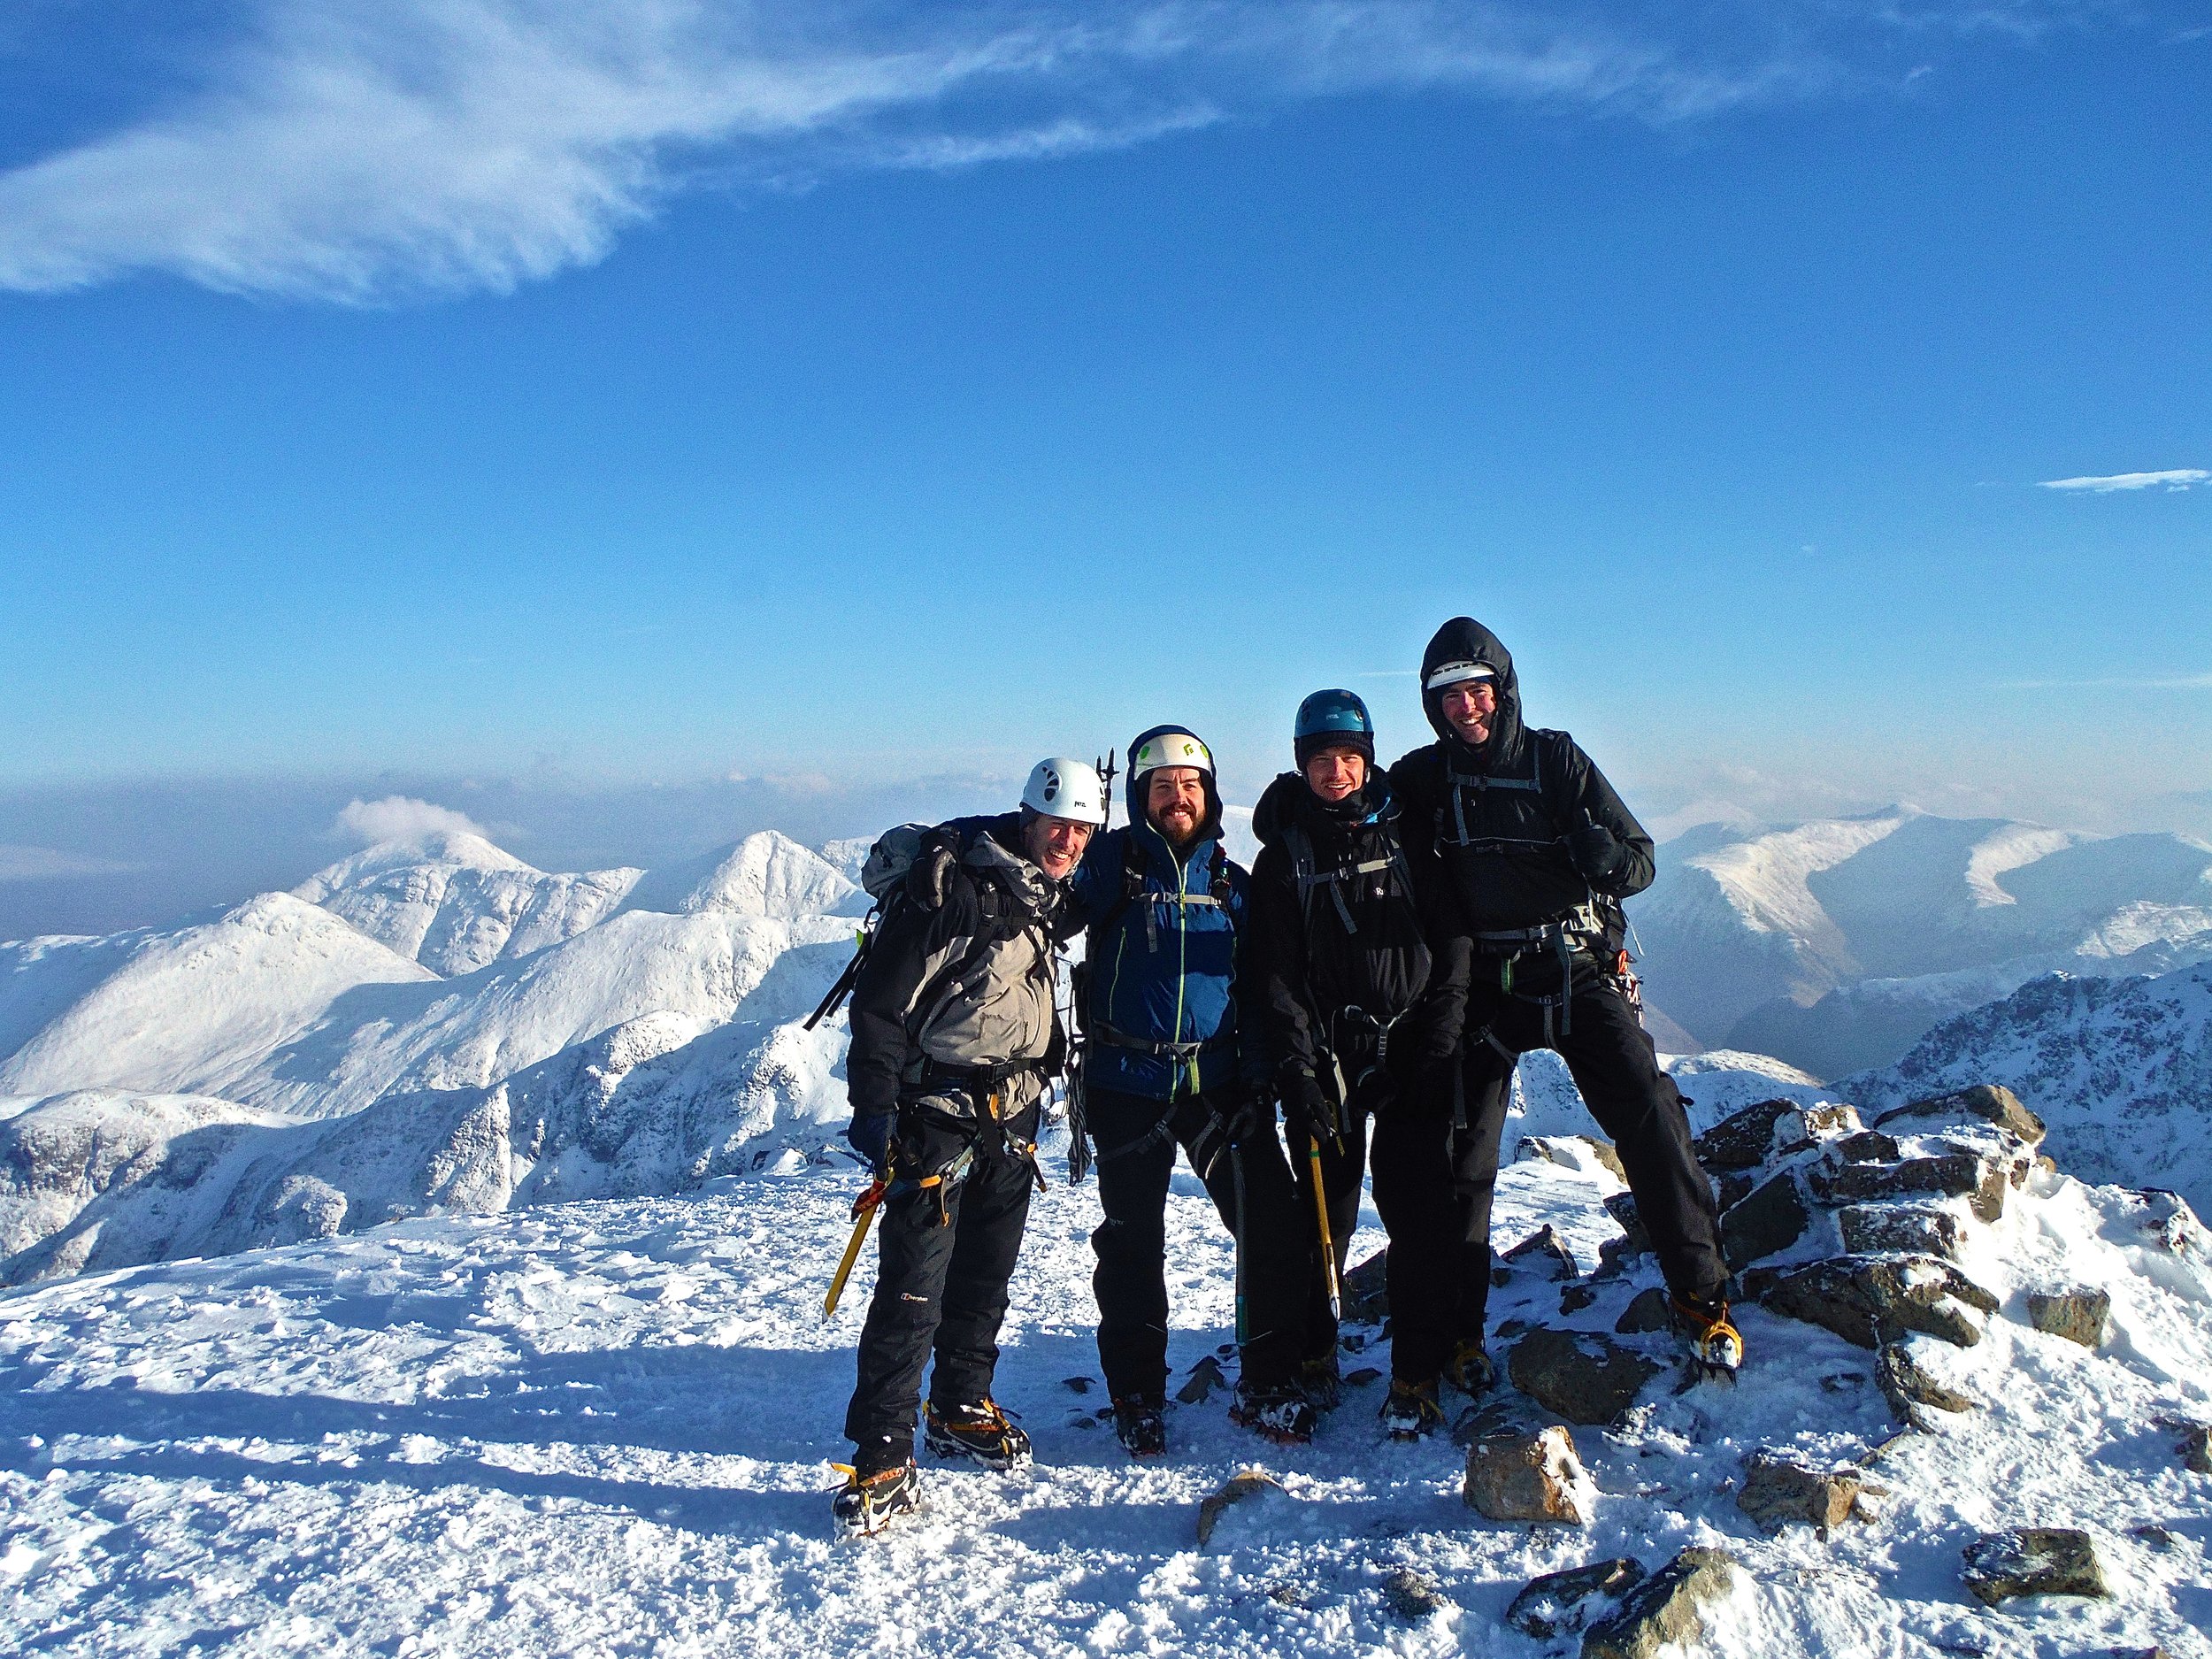 Stob Coire Nan Lochan, 1115m. After climbing up via Dorsal Arete. Smiles all around on what was a beautiful day